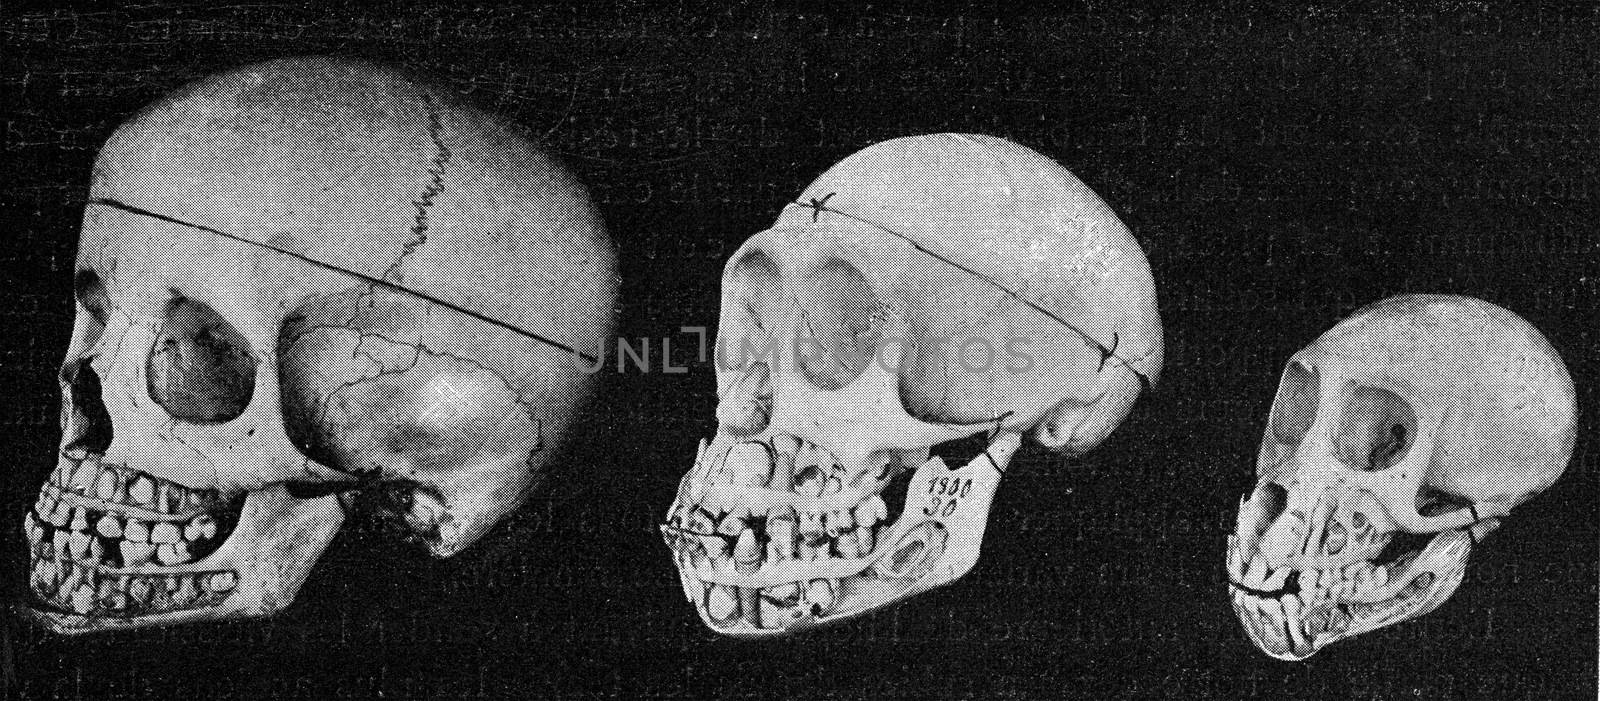 Skull of the man, the chimpanze and the Inuus, with the jaws cut to show the alternation of the teeth, vintage engraved illustration. From the Universe and Humanity, 1910.
